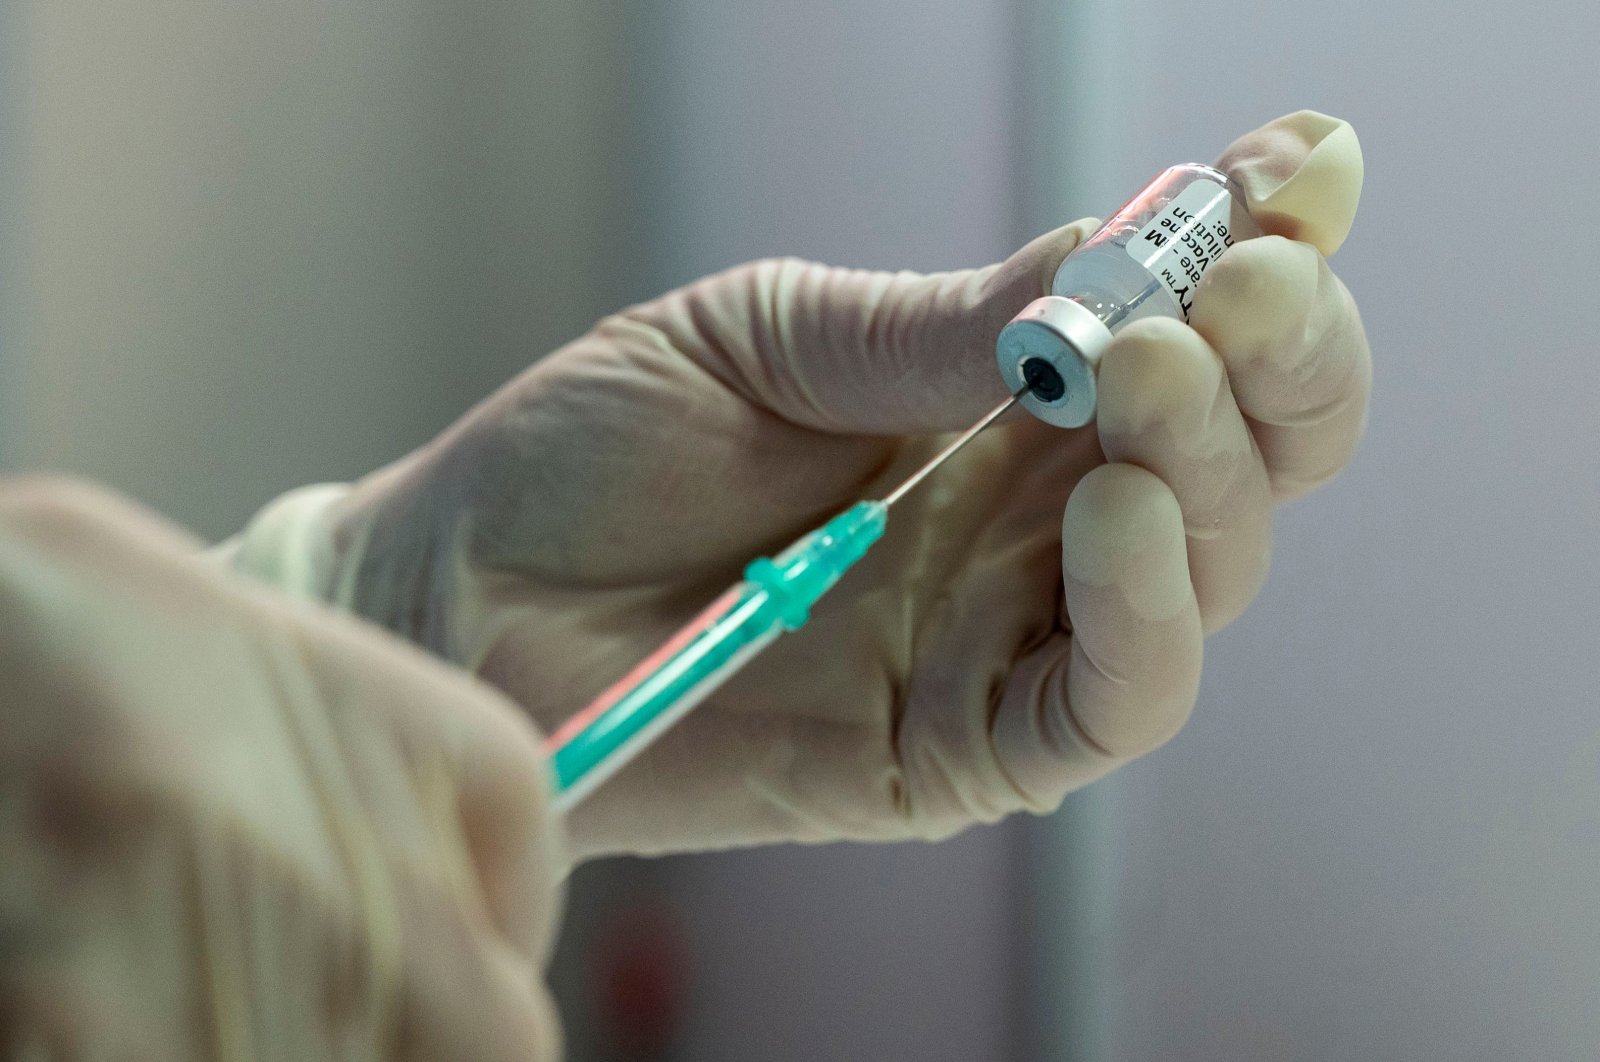 A nurse fills a syringe with the Pfizer Biontech vaccine at the vaccination center of German speciality chemicals company Evonik in Hanau, western Germany, on Mai 19, 2021, amid the ongoing coronavirus pandemic. (AFP Photo)